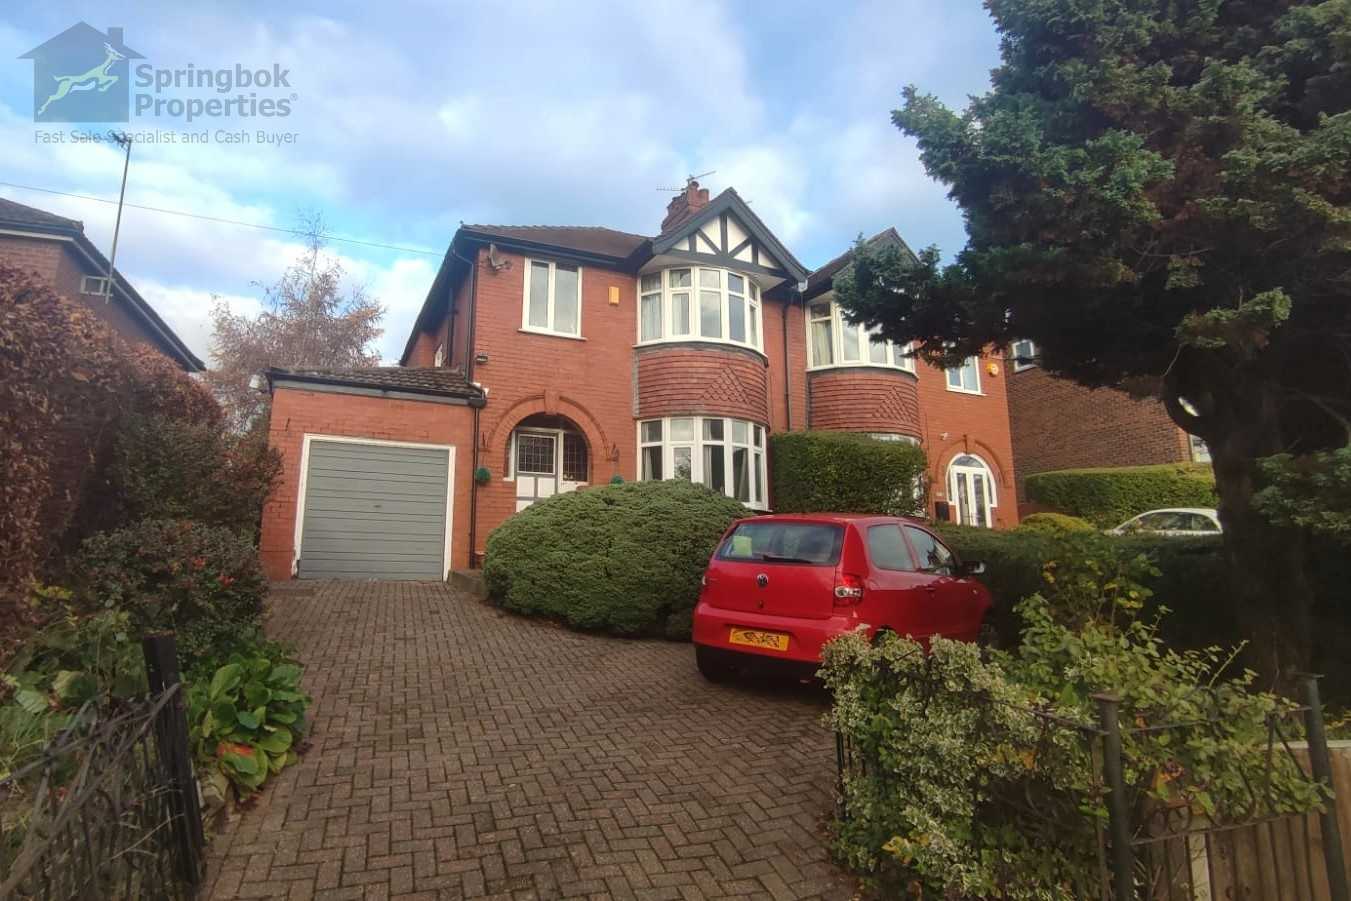 House in Romiley, Stockport 11125834